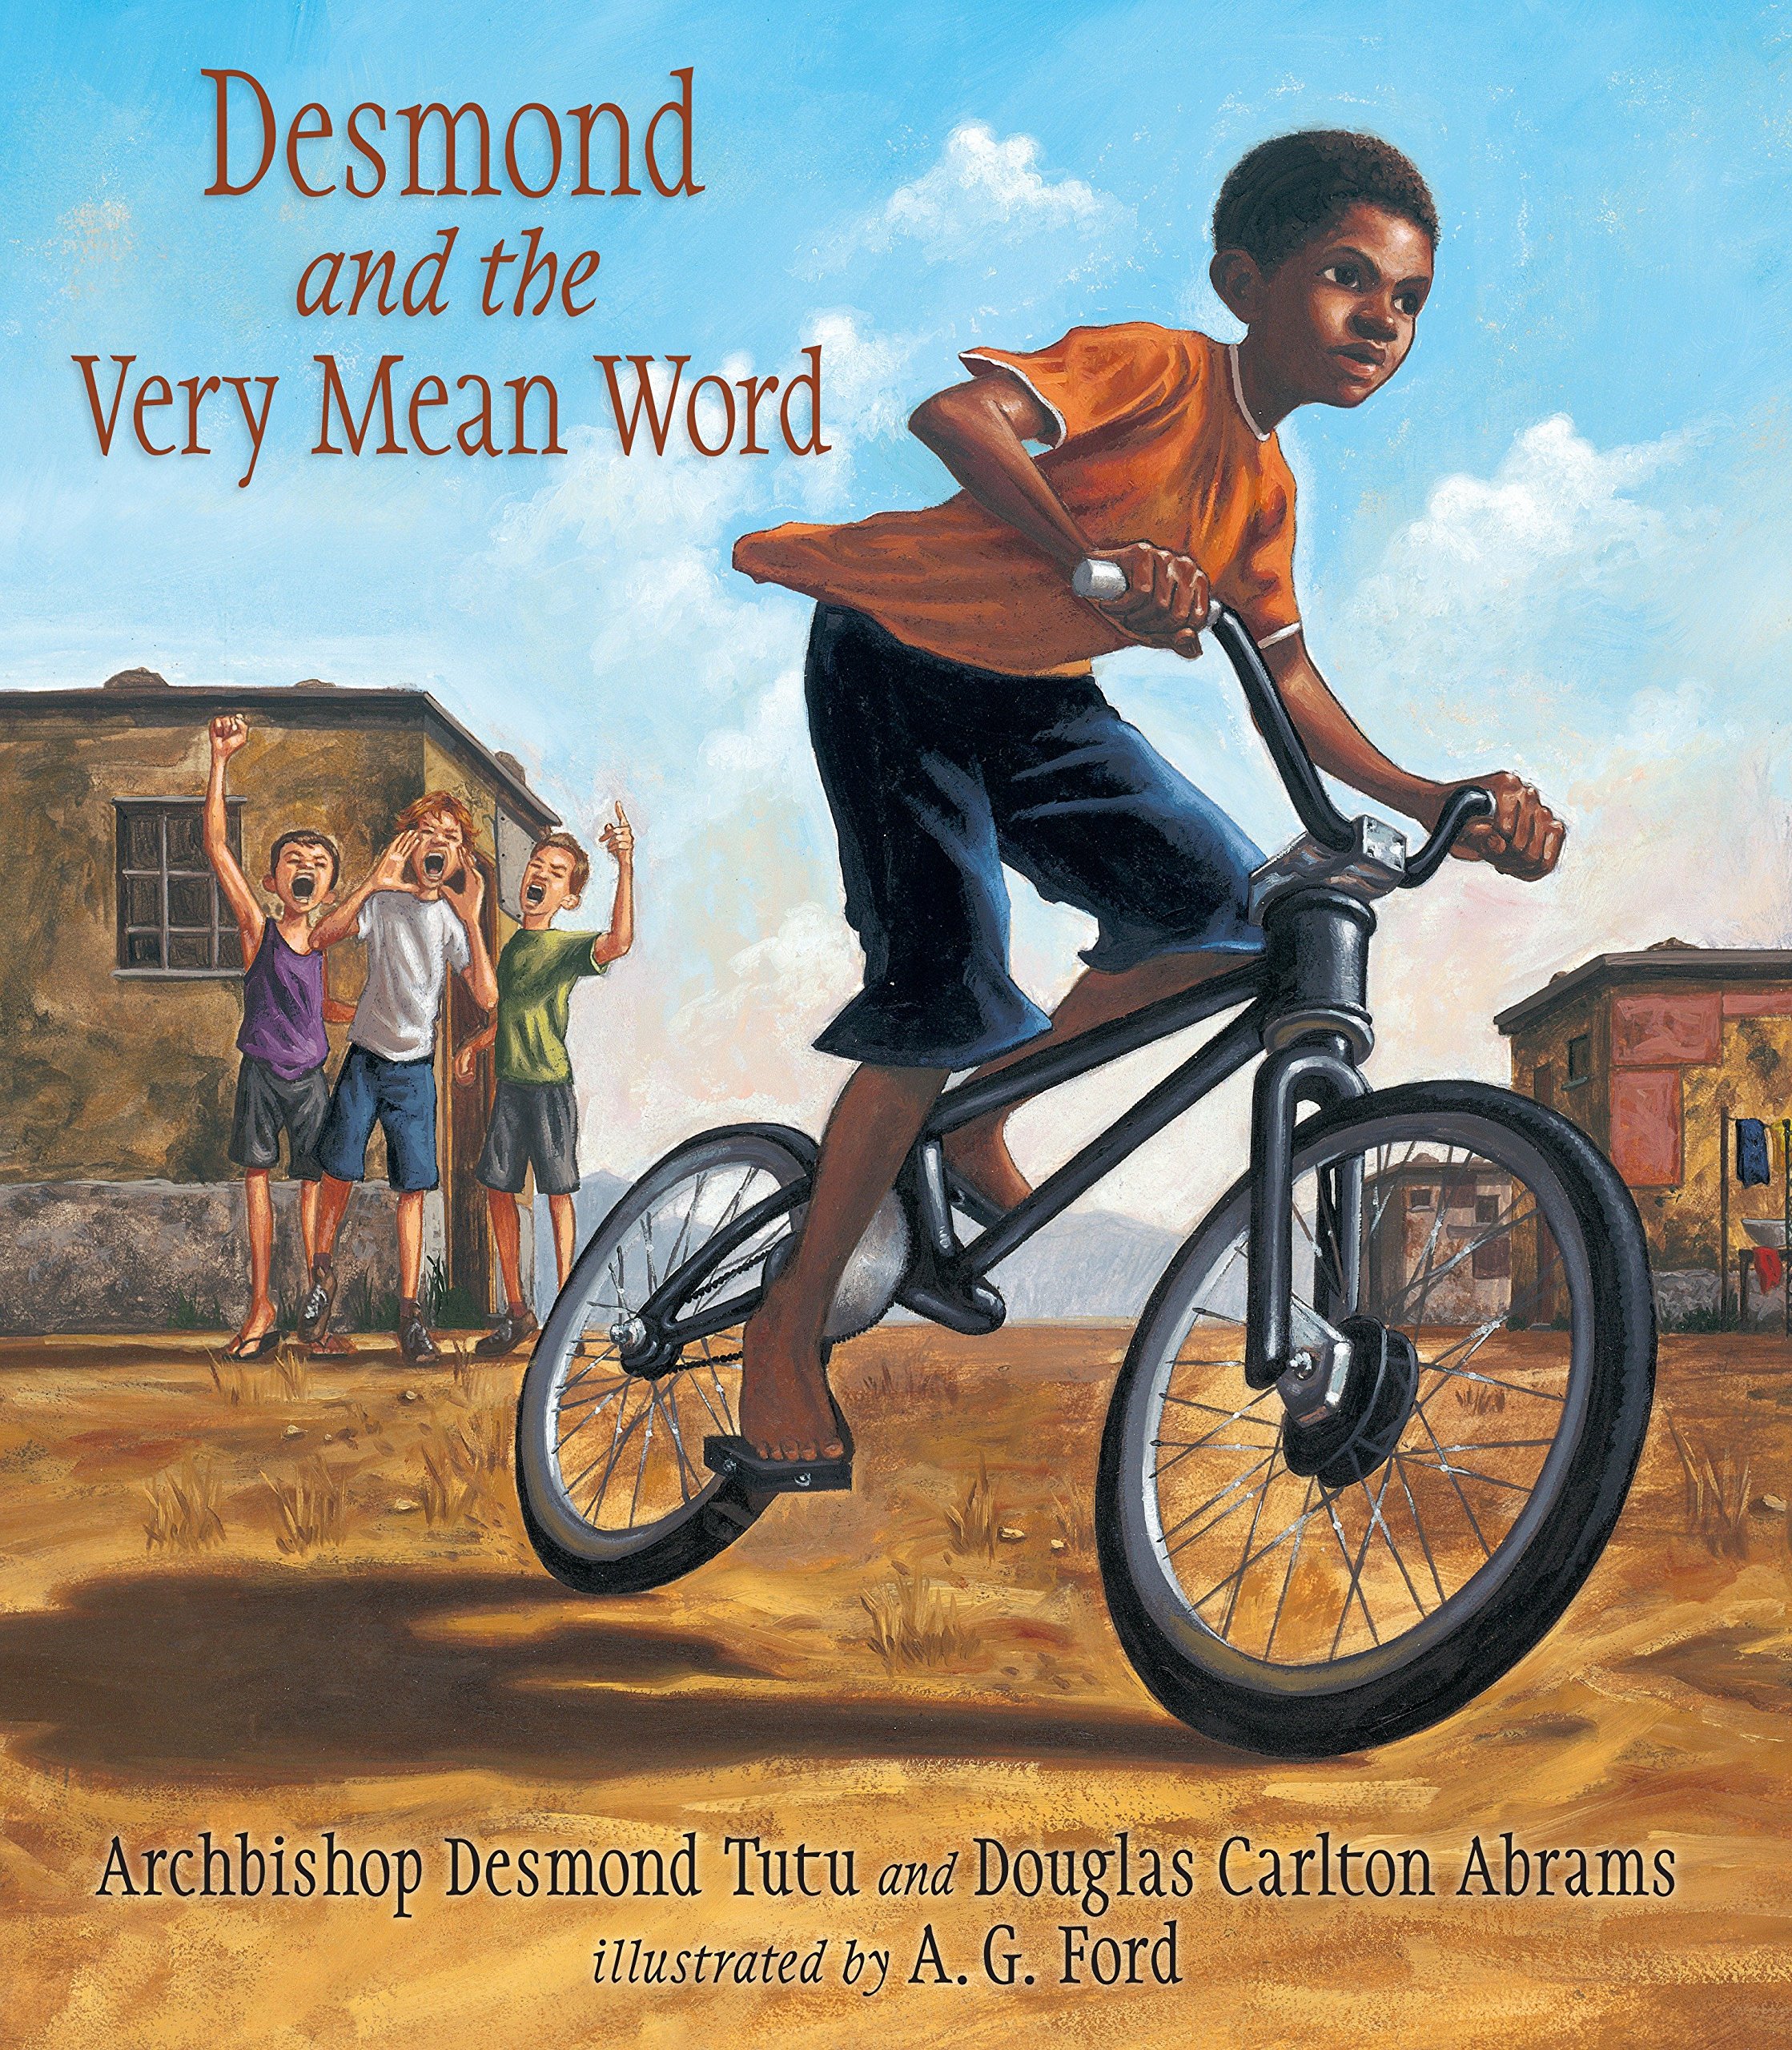 Desmond and the Very Mean Word book cover